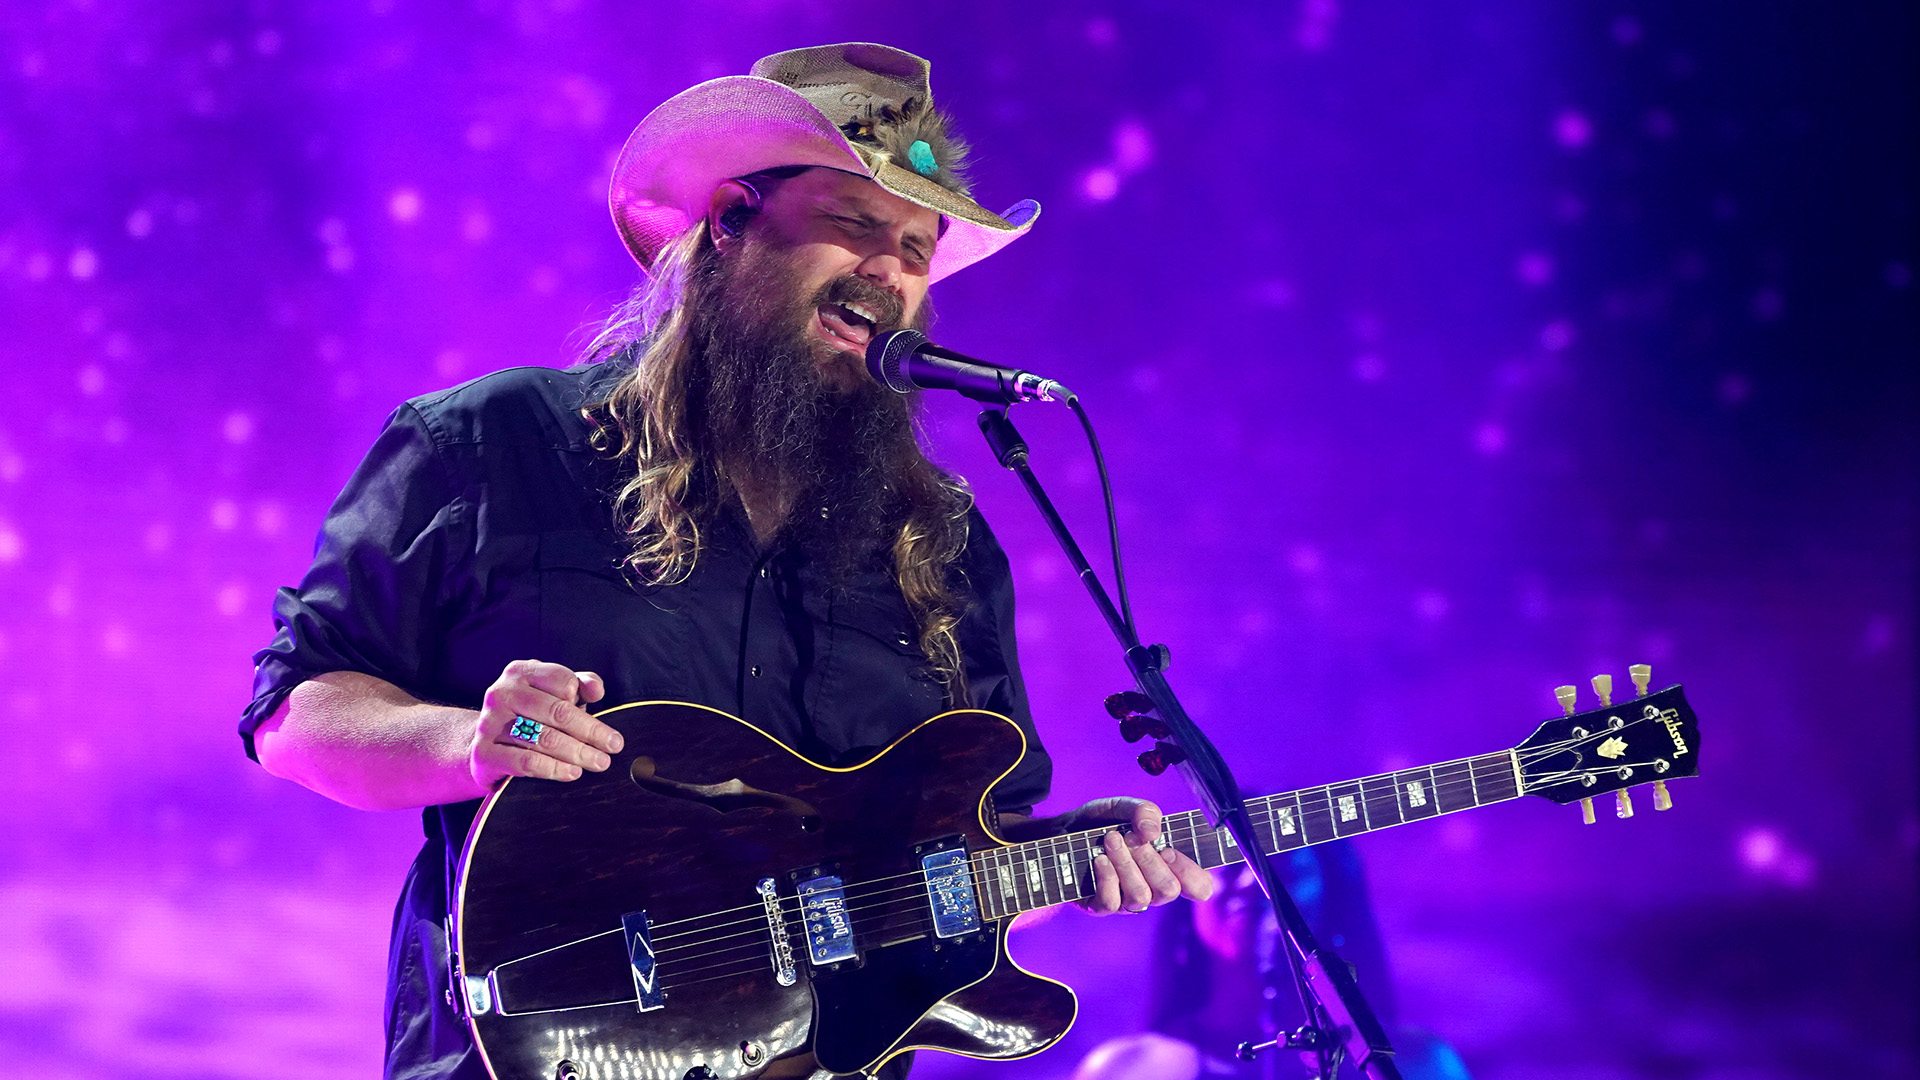 Chris Stapleton performs onstage for the 2021 CMT Music Awards at Bridgestone Arena on June 09, 2021 in Nashville, Tennessee.